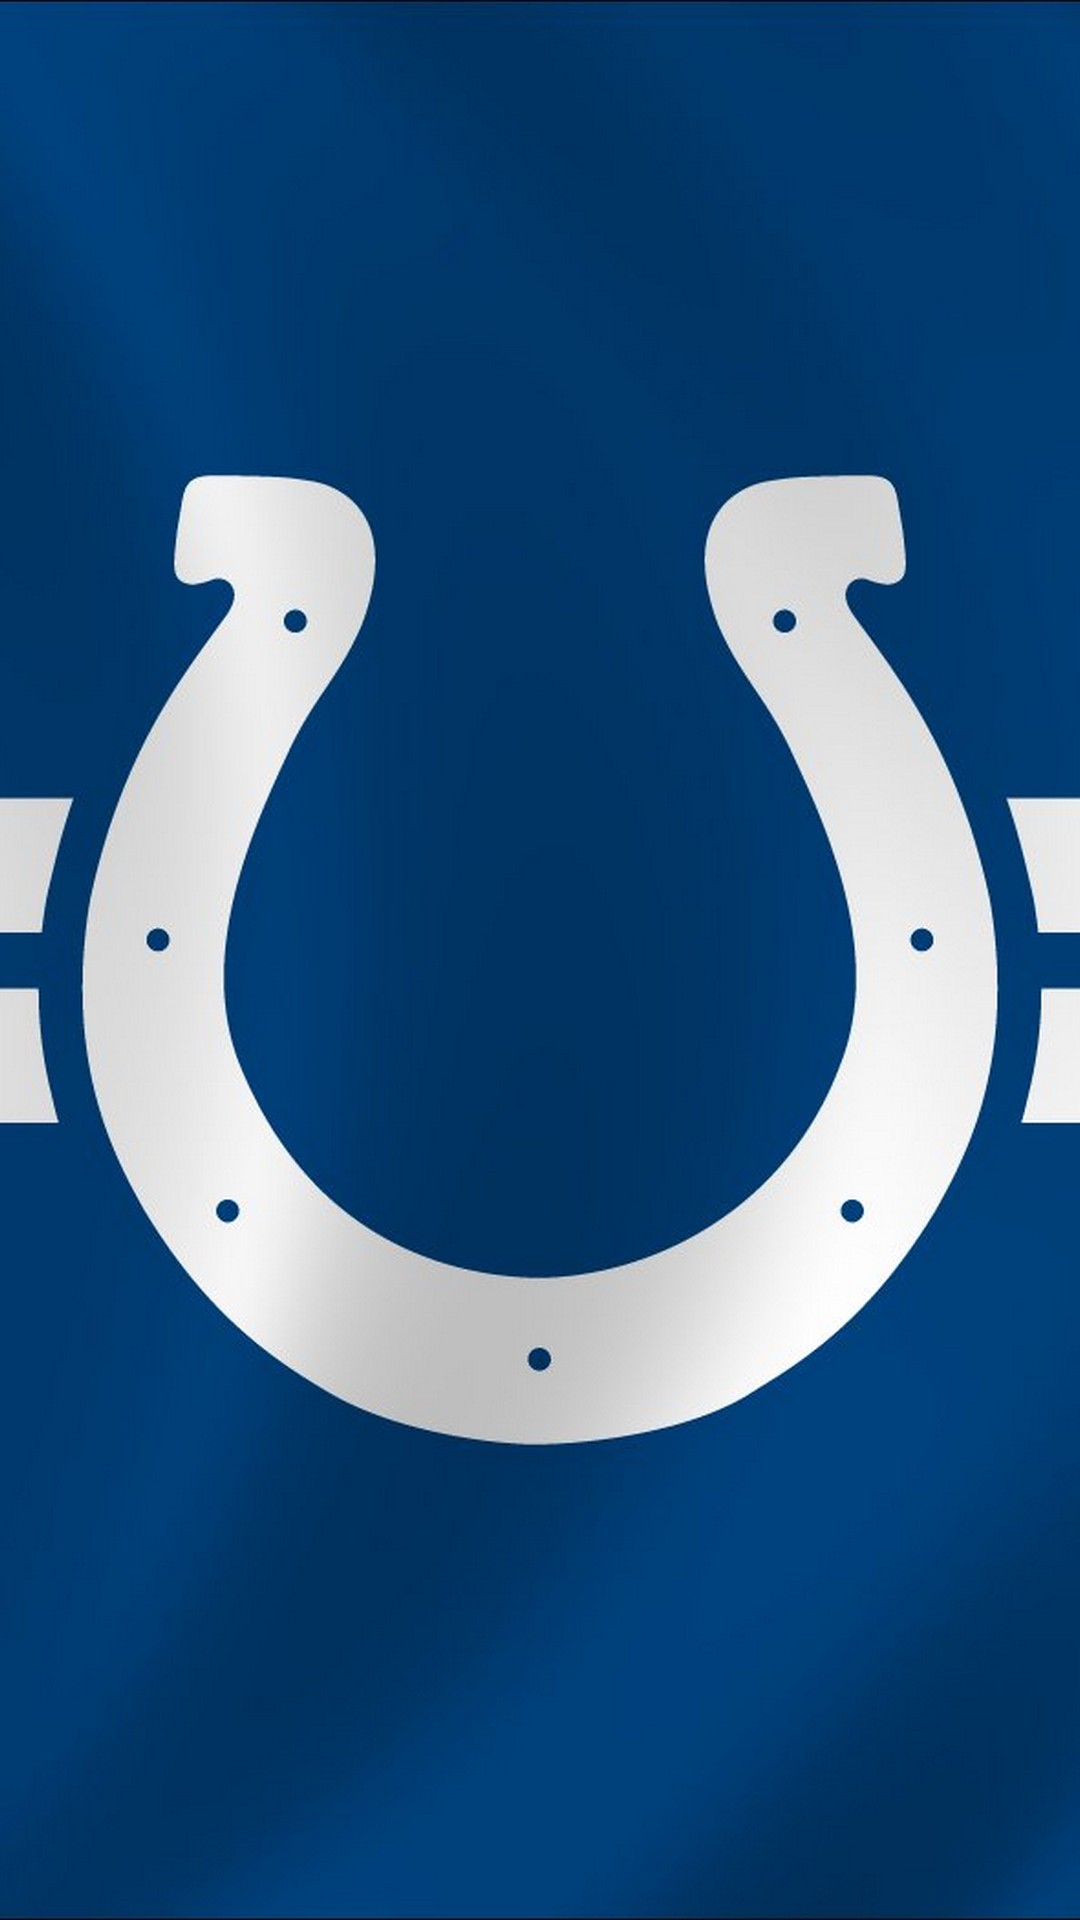 iPhone Wallpaper HD Indianapolis Colts With high-resolution 1080X1920 pixel. You can use this wallpaper for your Mac or Windows Desktop Background, iPhone, Android or Tablet and another Smartphone device